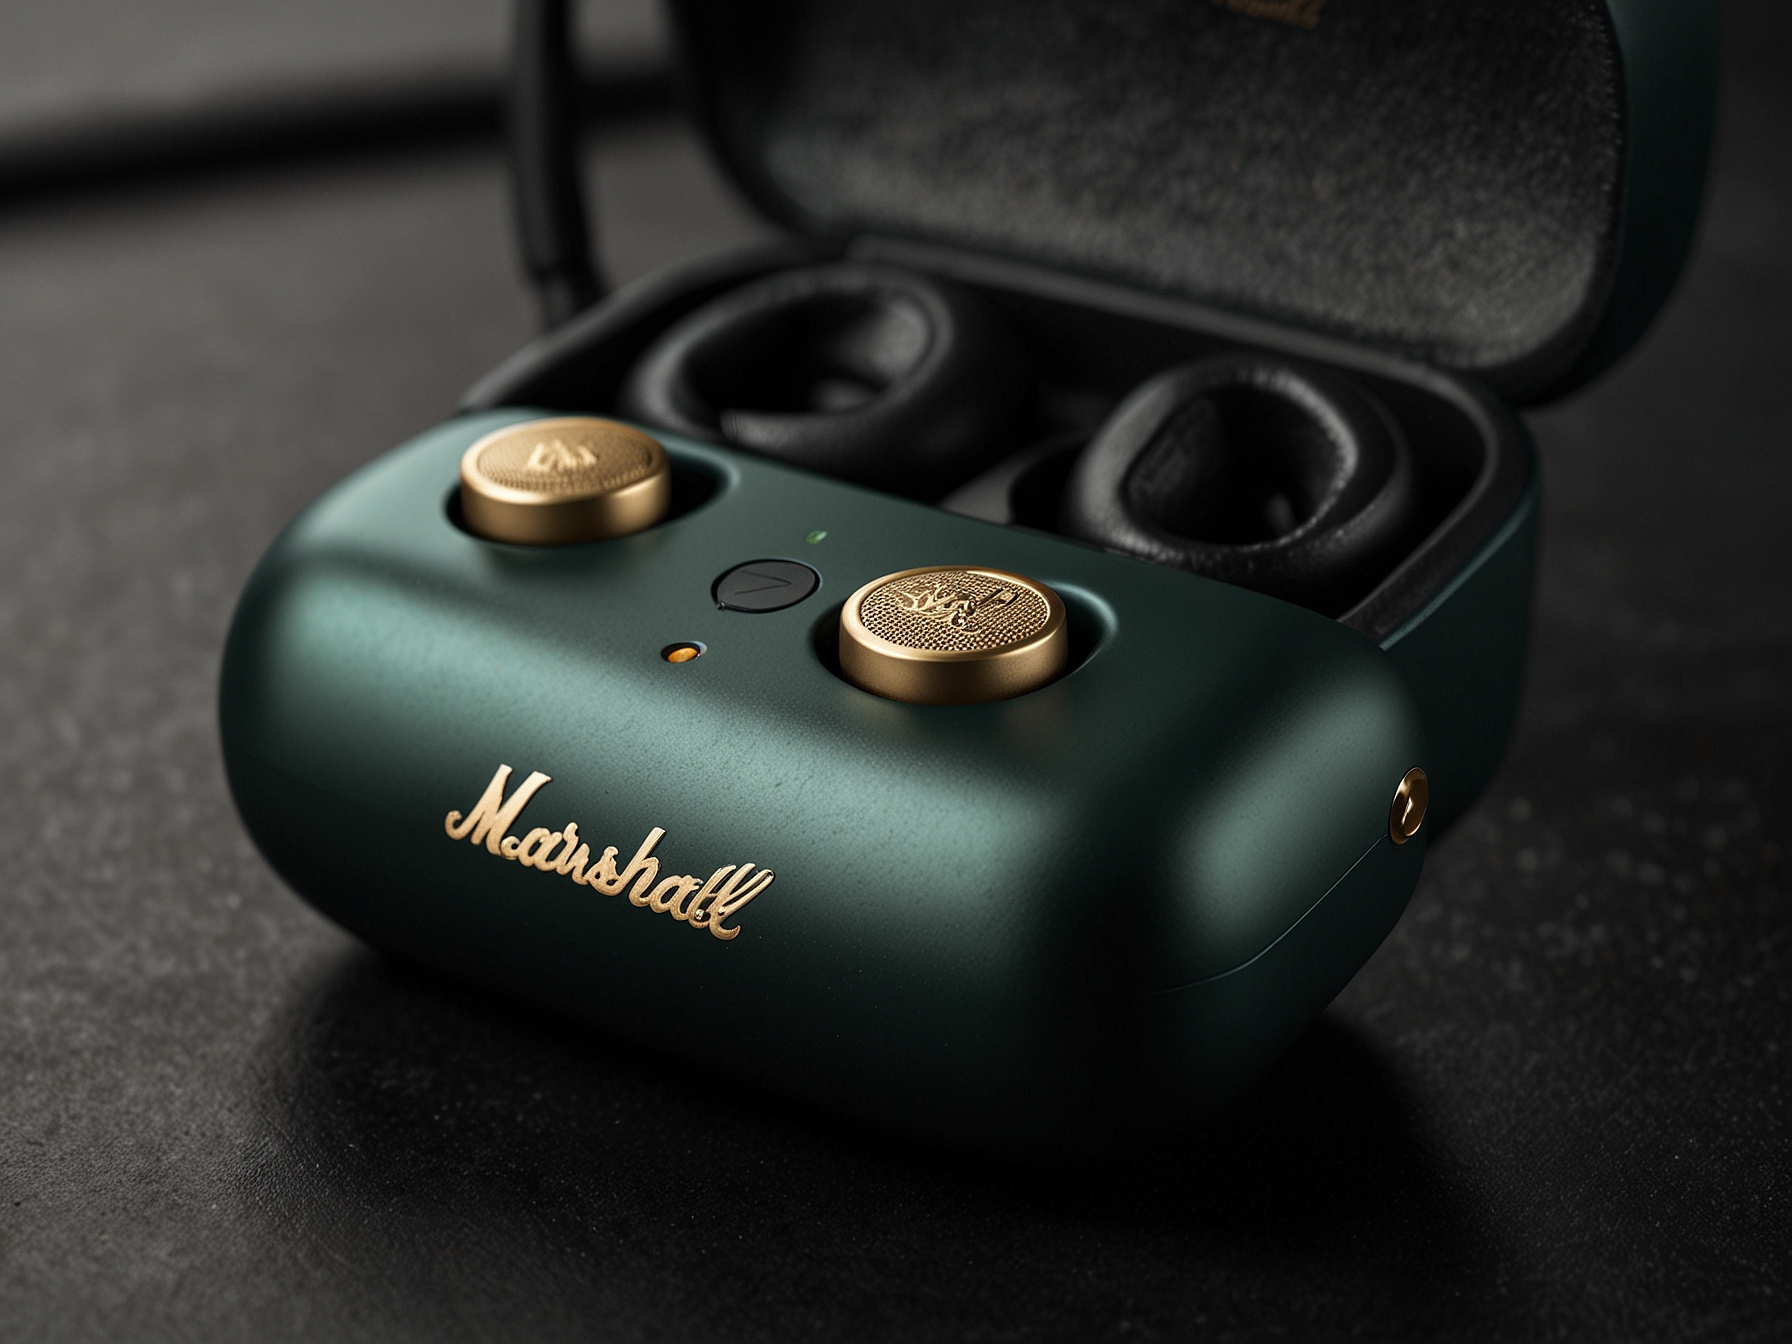 Marshall Minor IV earbuds provide seamless connectivity with Bluetooth 5.2 technology and intuitive touch controls, making them ideal for music enthusiasts seeking high-quality, uninterrupted audio streaming.